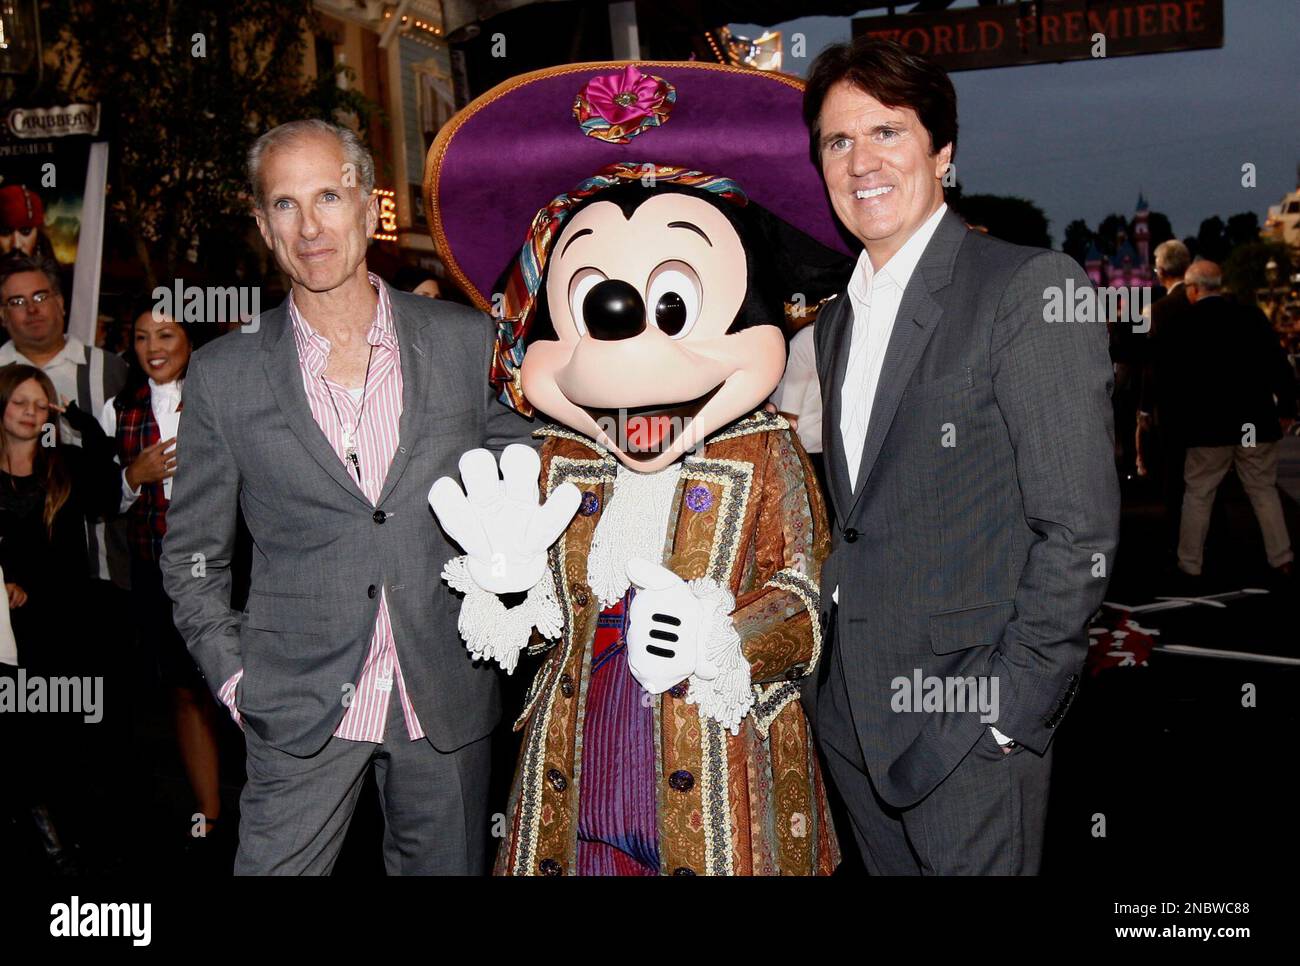 John Deluca, left, Mickey Mouse, and Rob Marshall are seen at the World Premiere of "Pirates of the Caribbean: On Stranger Tides" at Disneyland in Anaheim, Calif., on Saturday, May 7, 2011. (AP Photo/Matt Sayles) Stock Photo